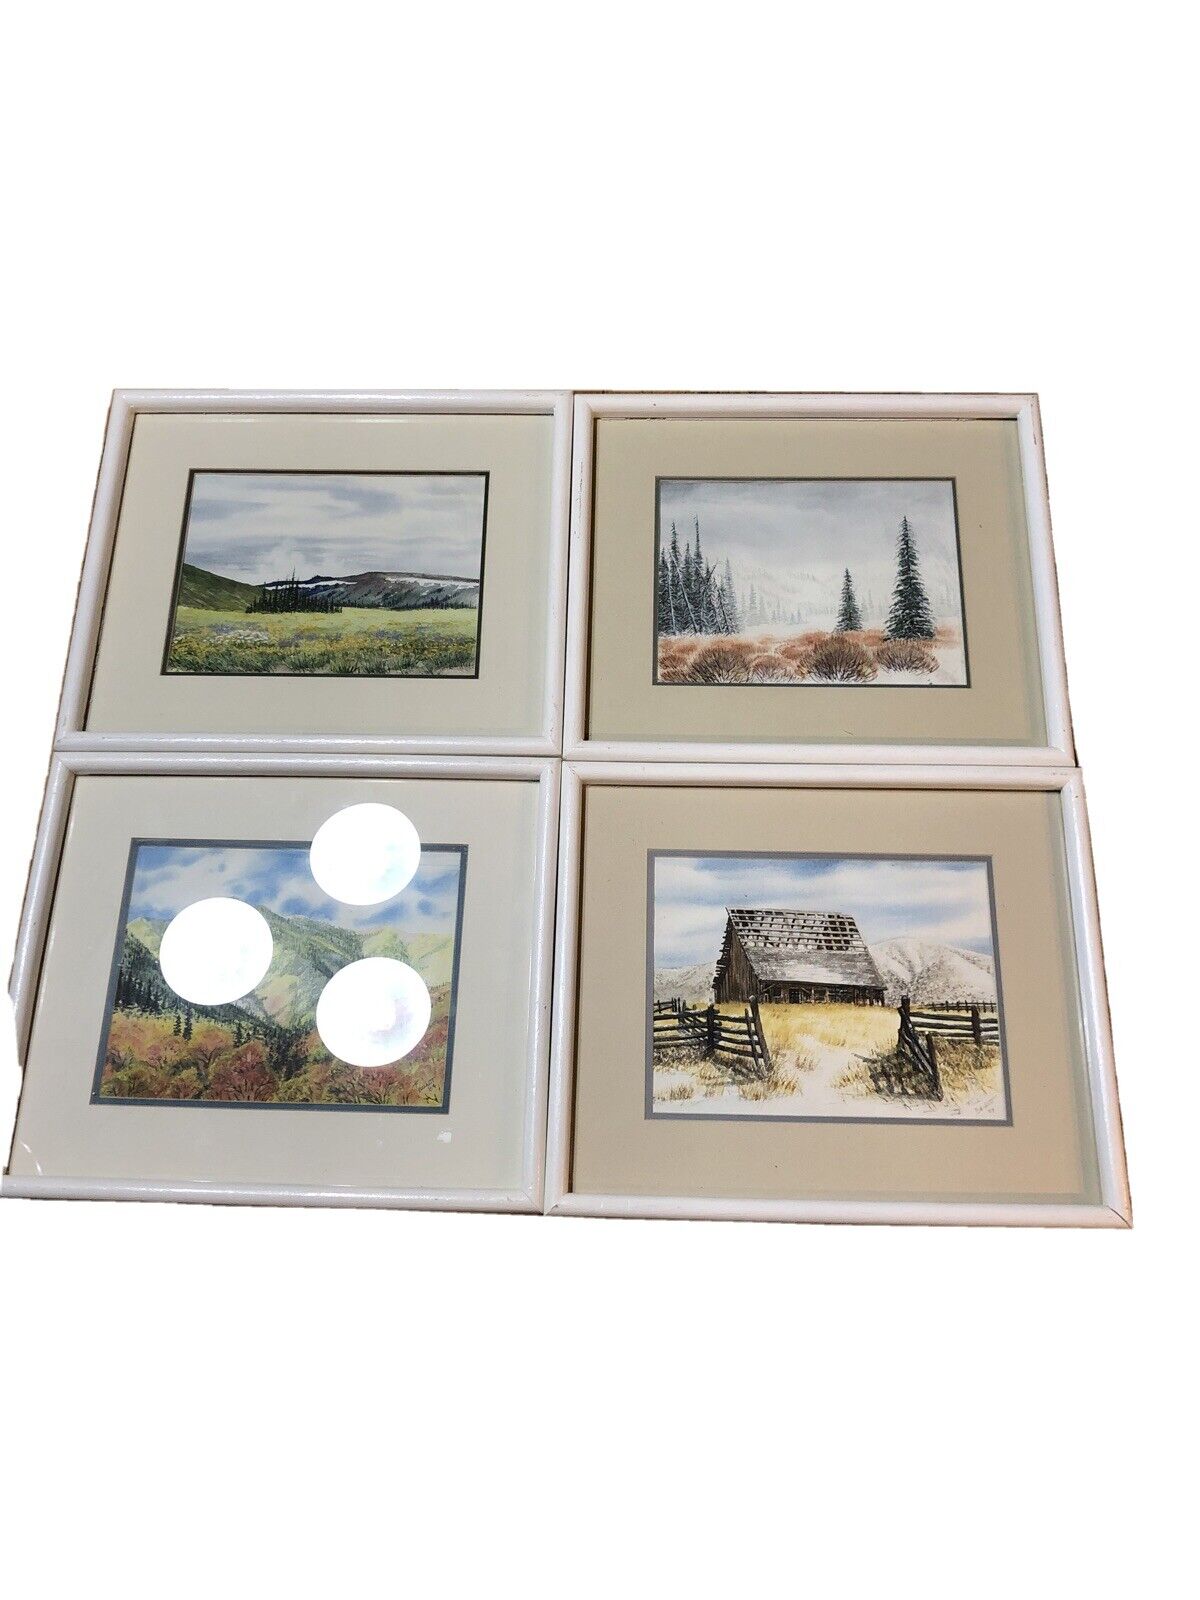 Set of 4 FOUR Original Fred Beckett Watercolors 4 seasons signed England painter